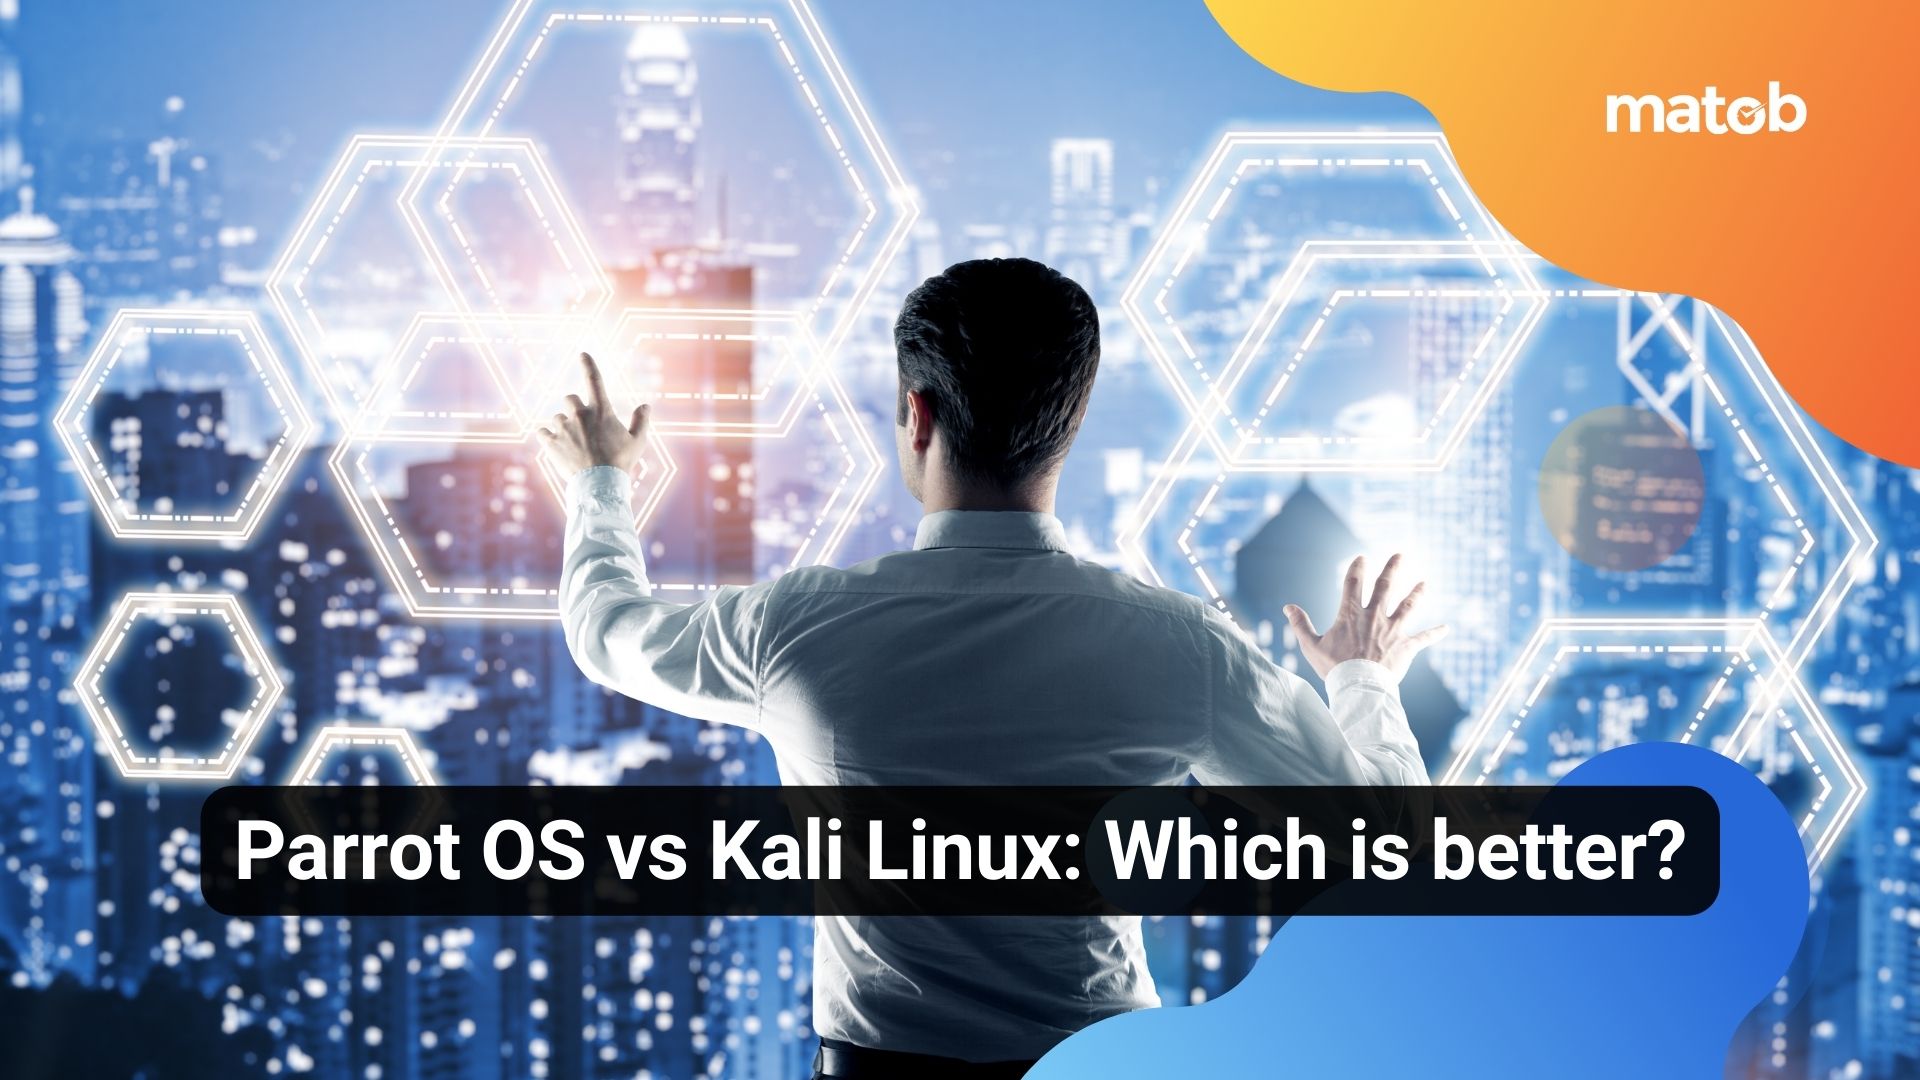 Parrot OS vs Kali Linux: Which is better?